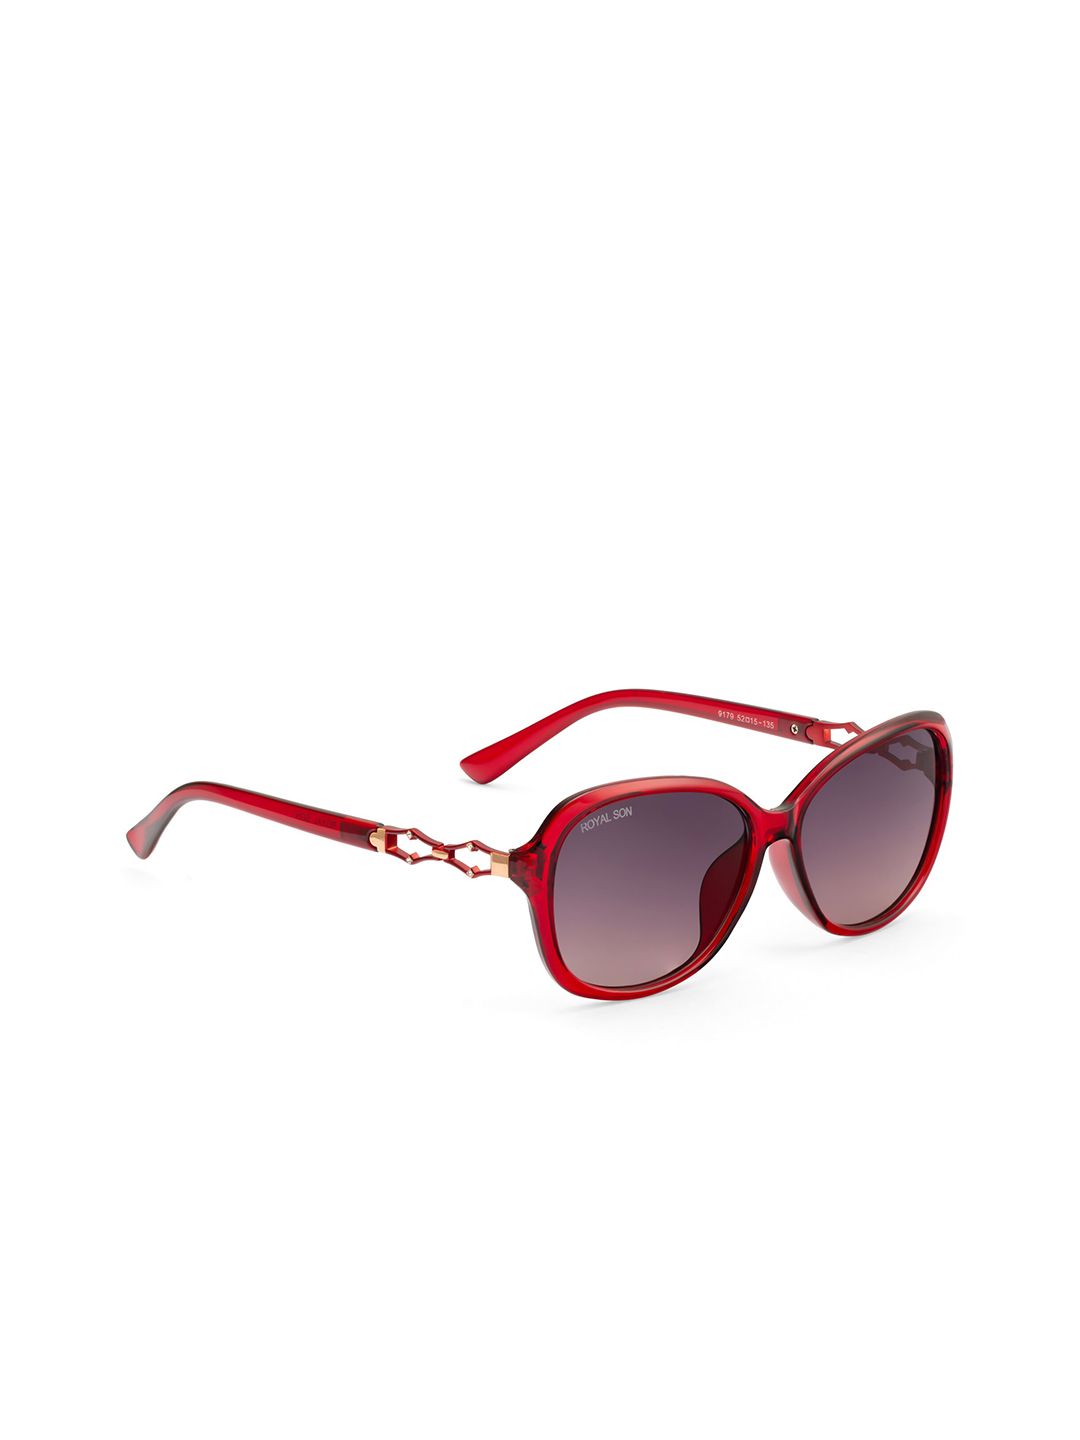 ROYAL SON Women Grey Lens & Red Butterfly Sunglasses with UV Protected Lens CHIWM00117 Price in India